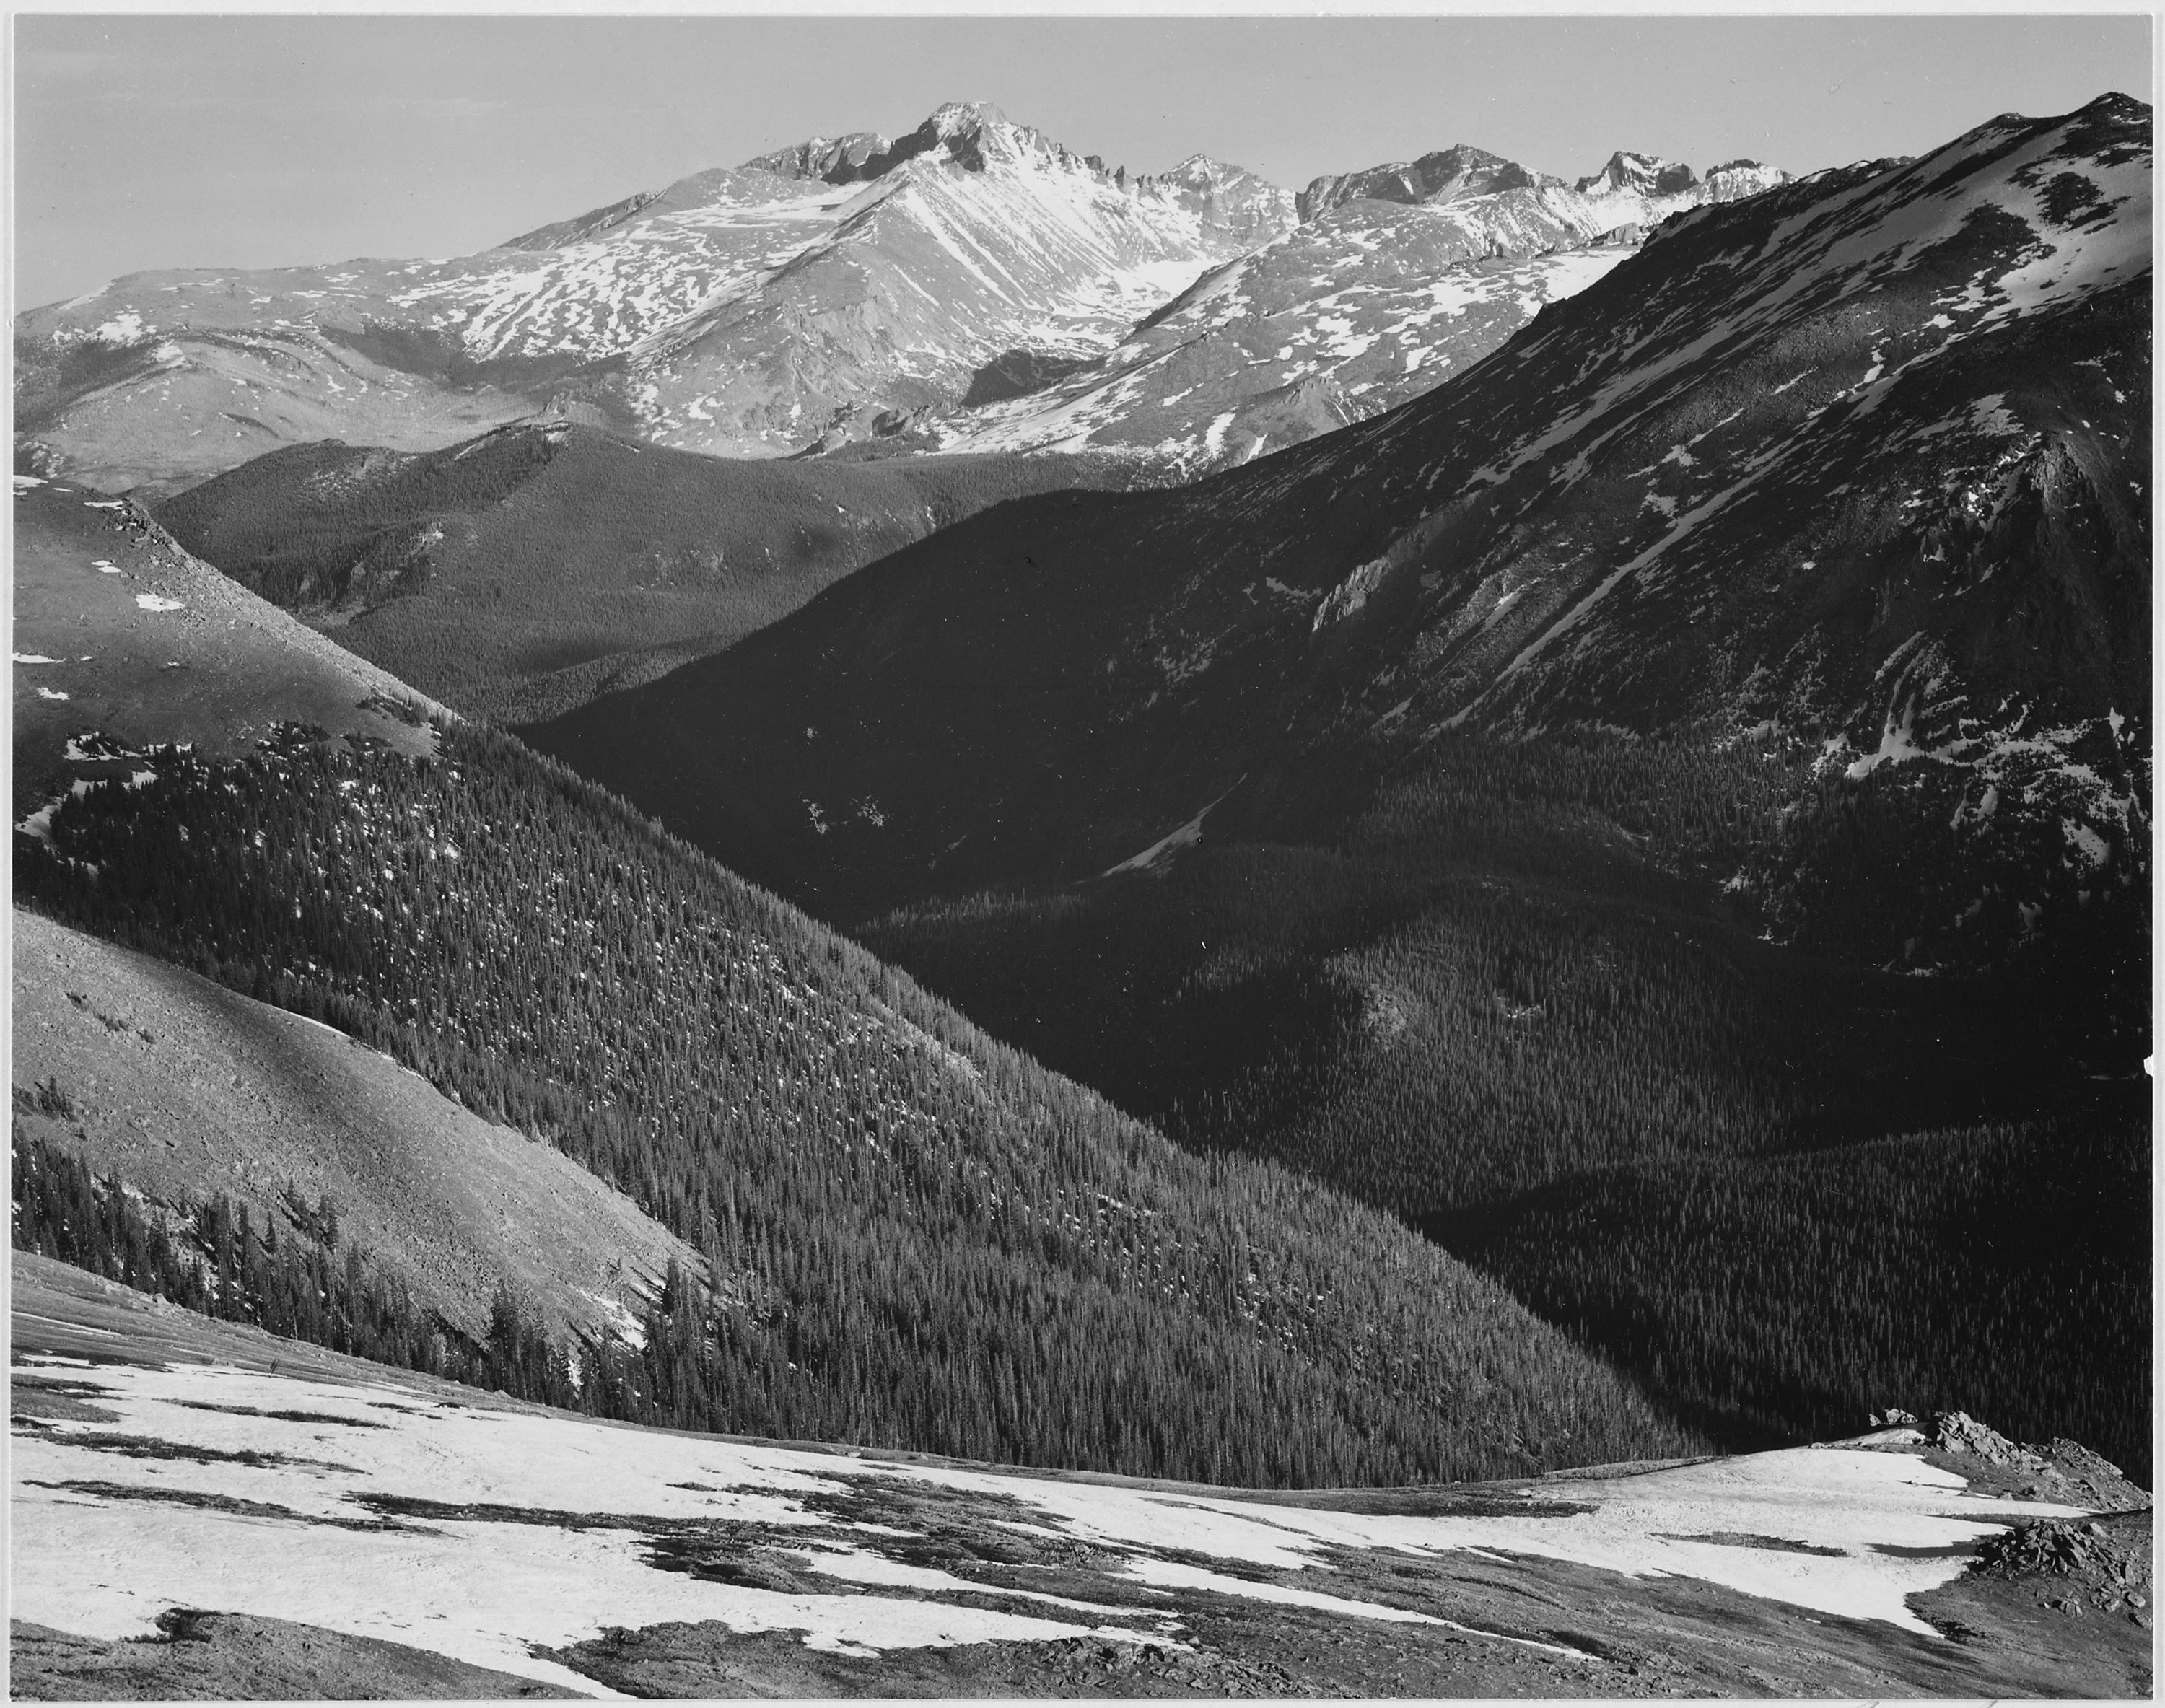 Ansel Adams - National Archives 79-AA-M10